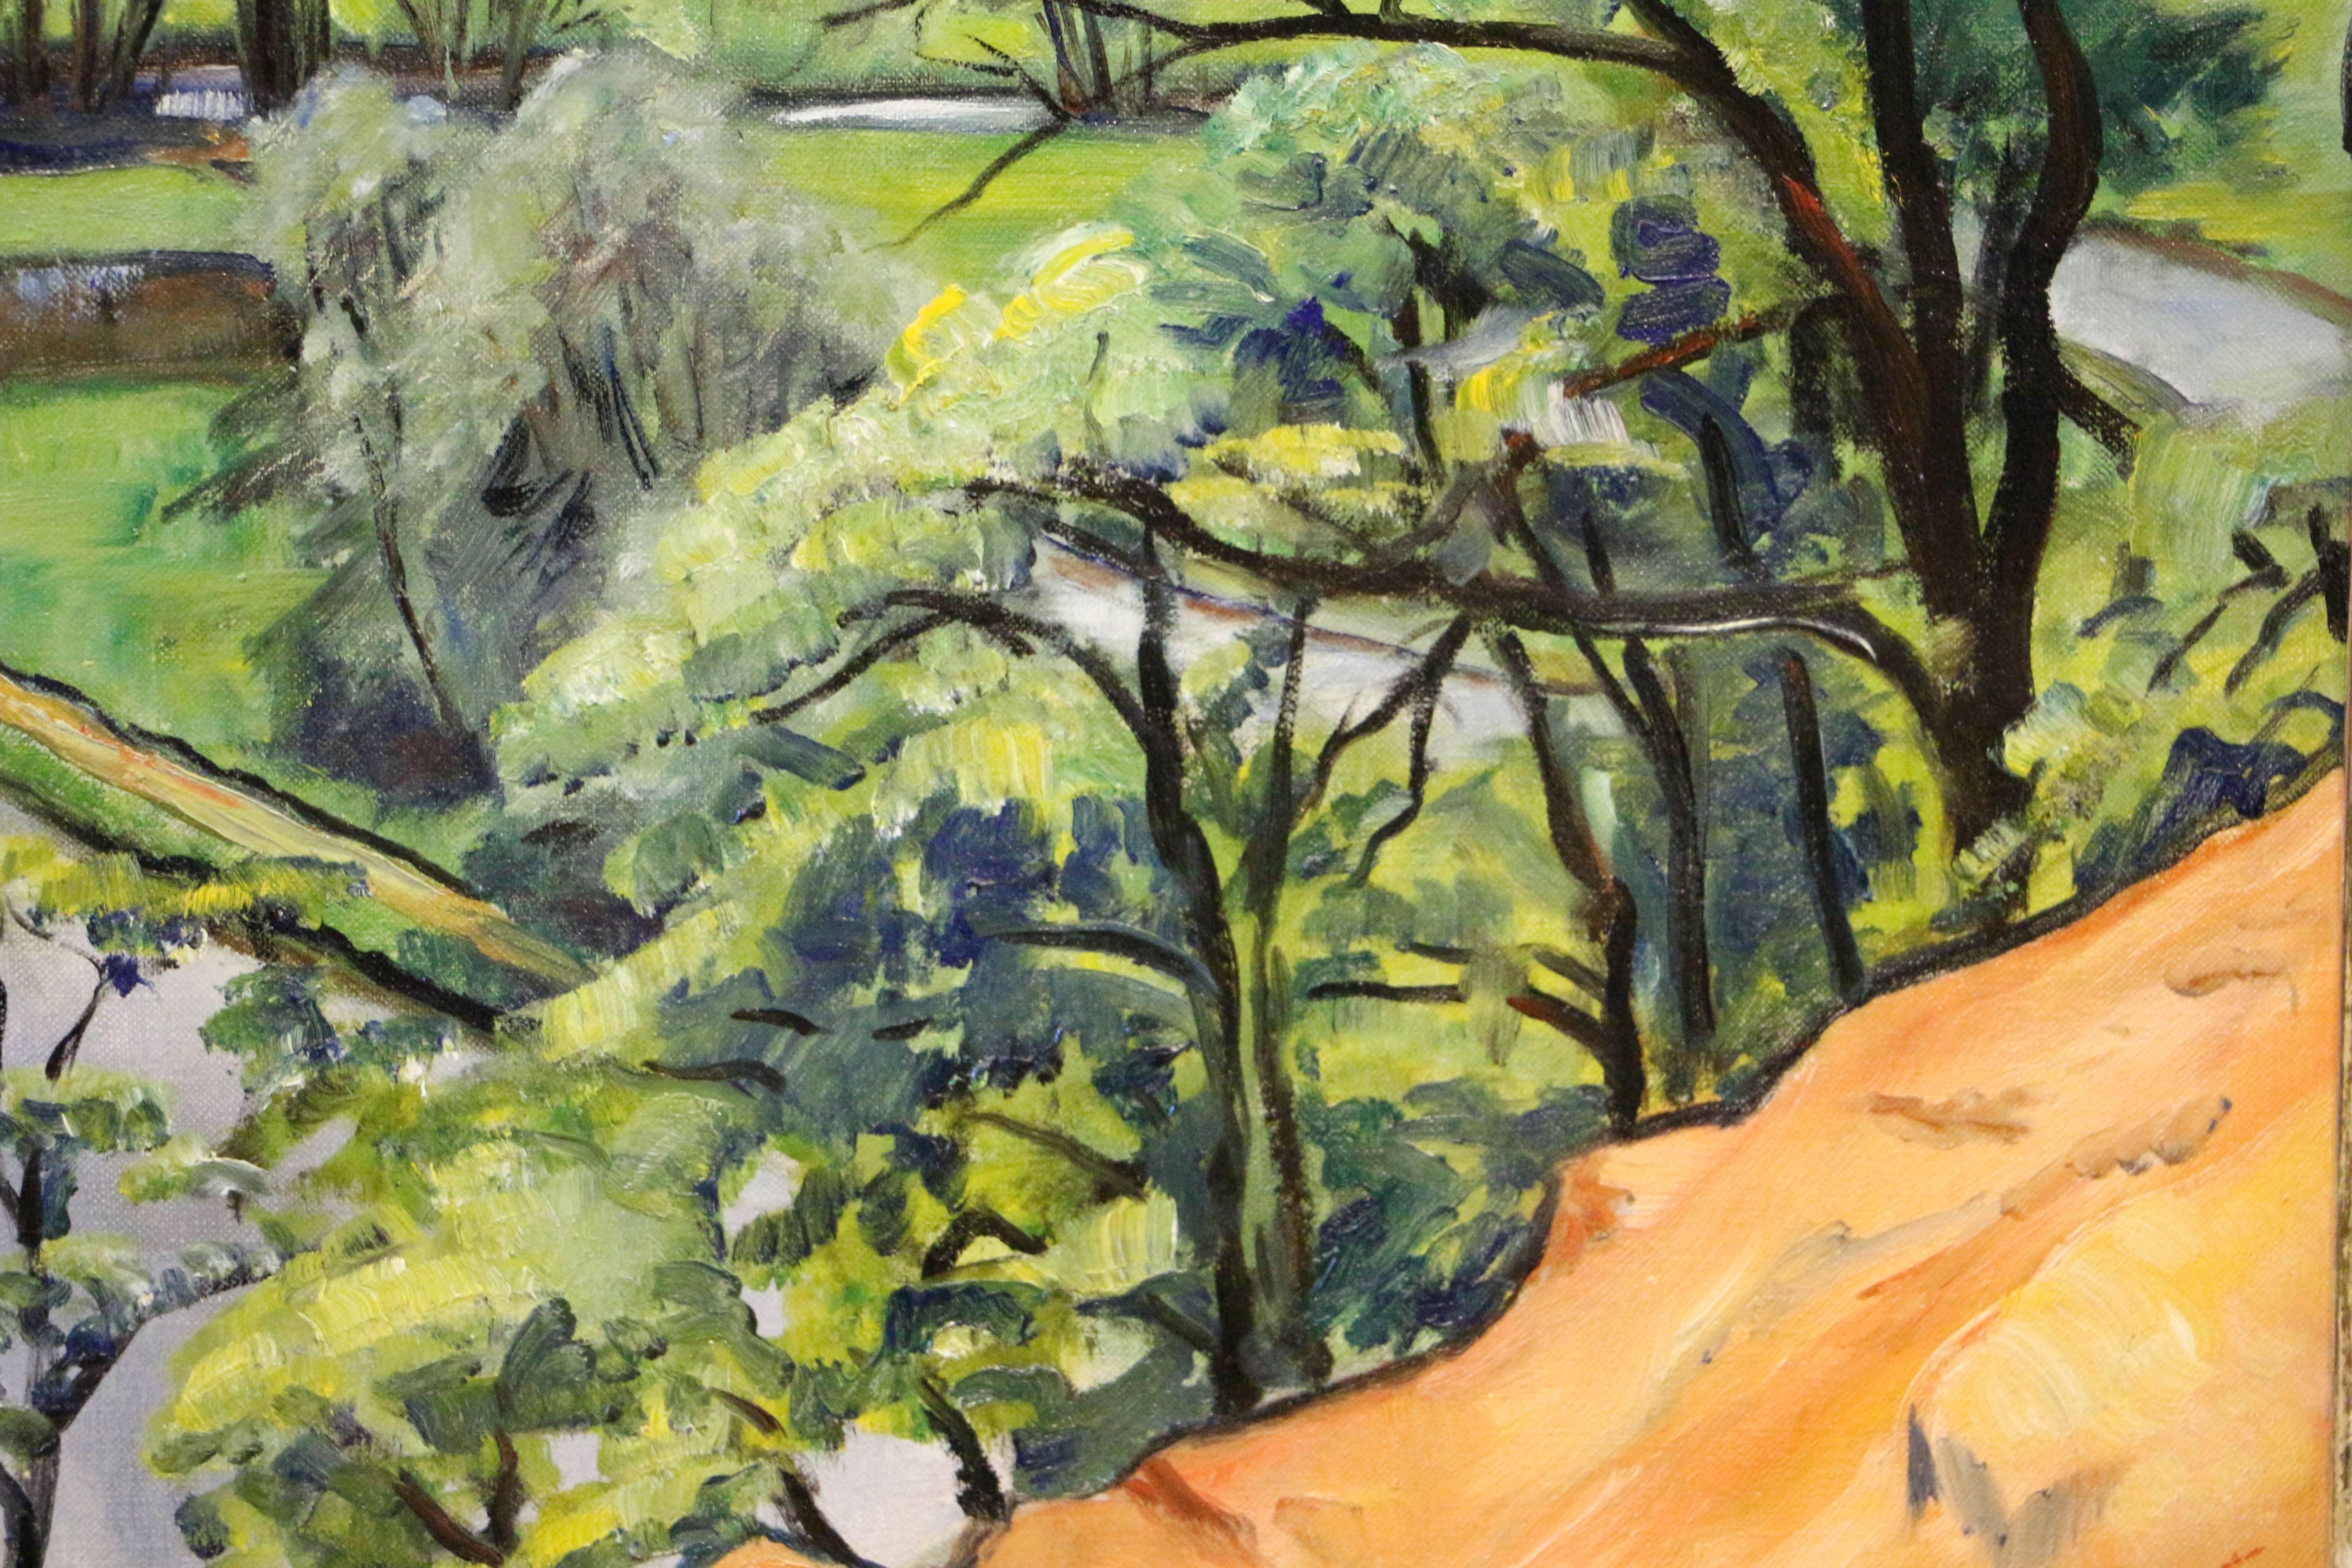 This original oil on canvas is representative of the earlier landscape artwork created by Frederick Wight (1902-1986). Wight was key in transforming Los Angeles into a major art center. He was an educator and director of the campus gallery at the